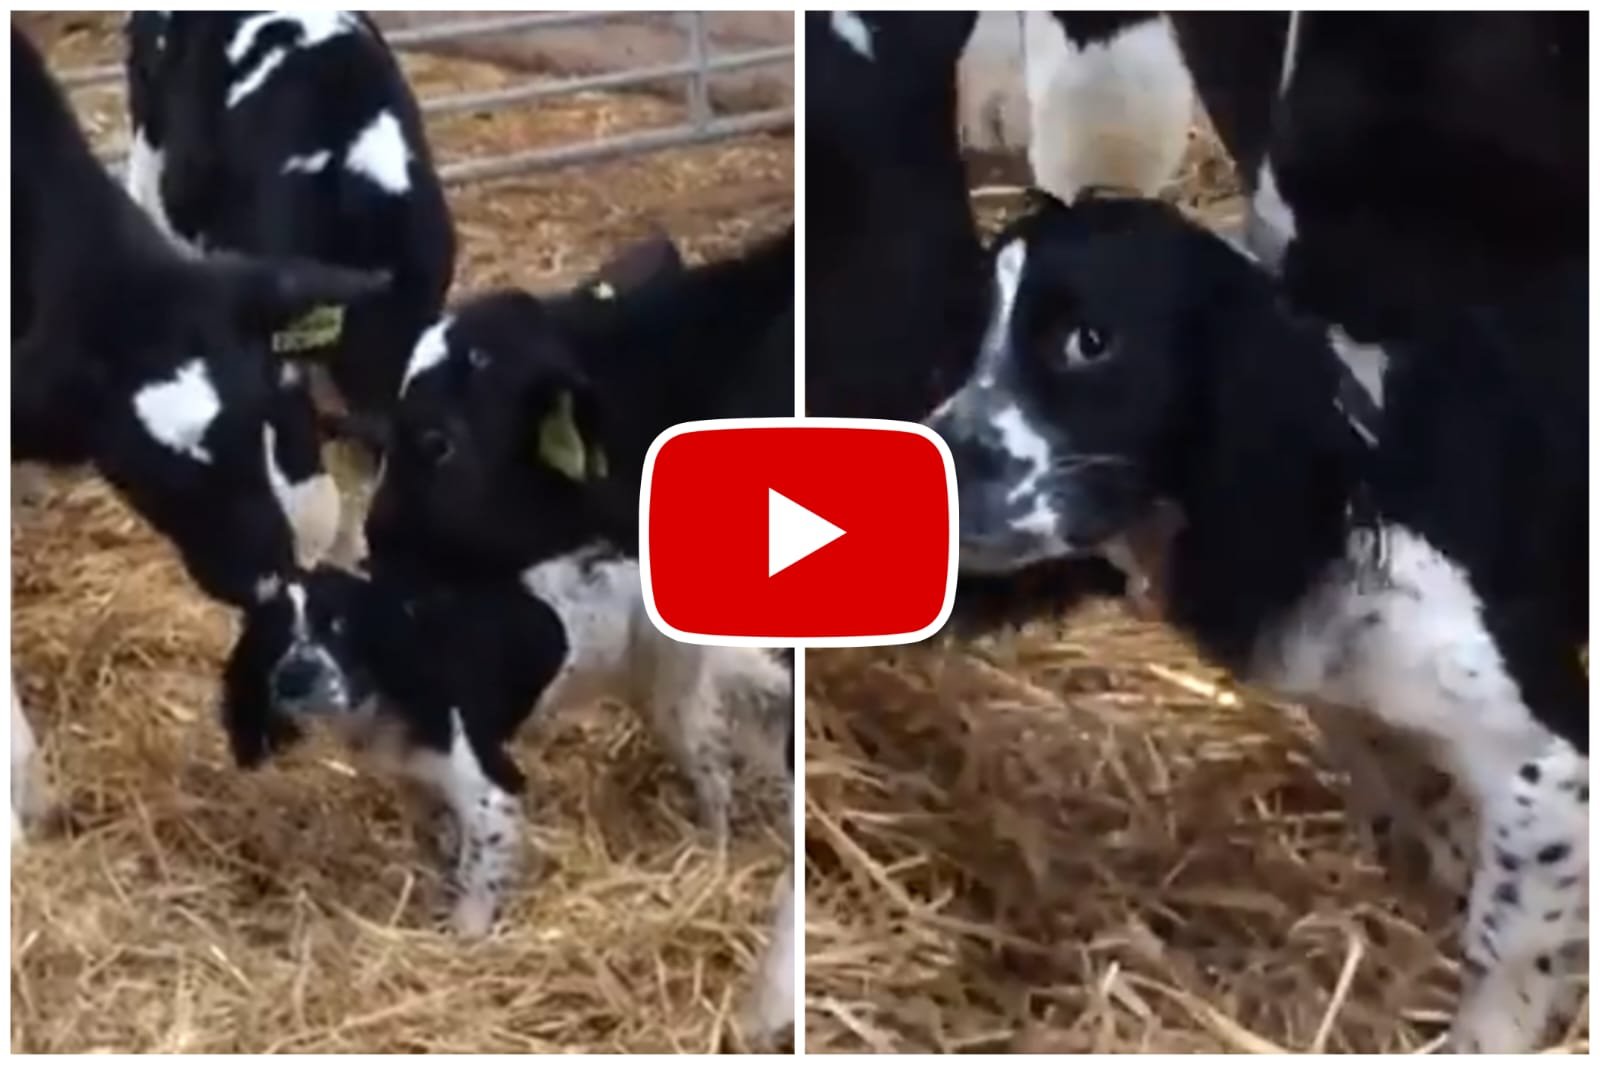 Doggy Ka Video - The cow started caressing the dog, mistaking it for a calf.